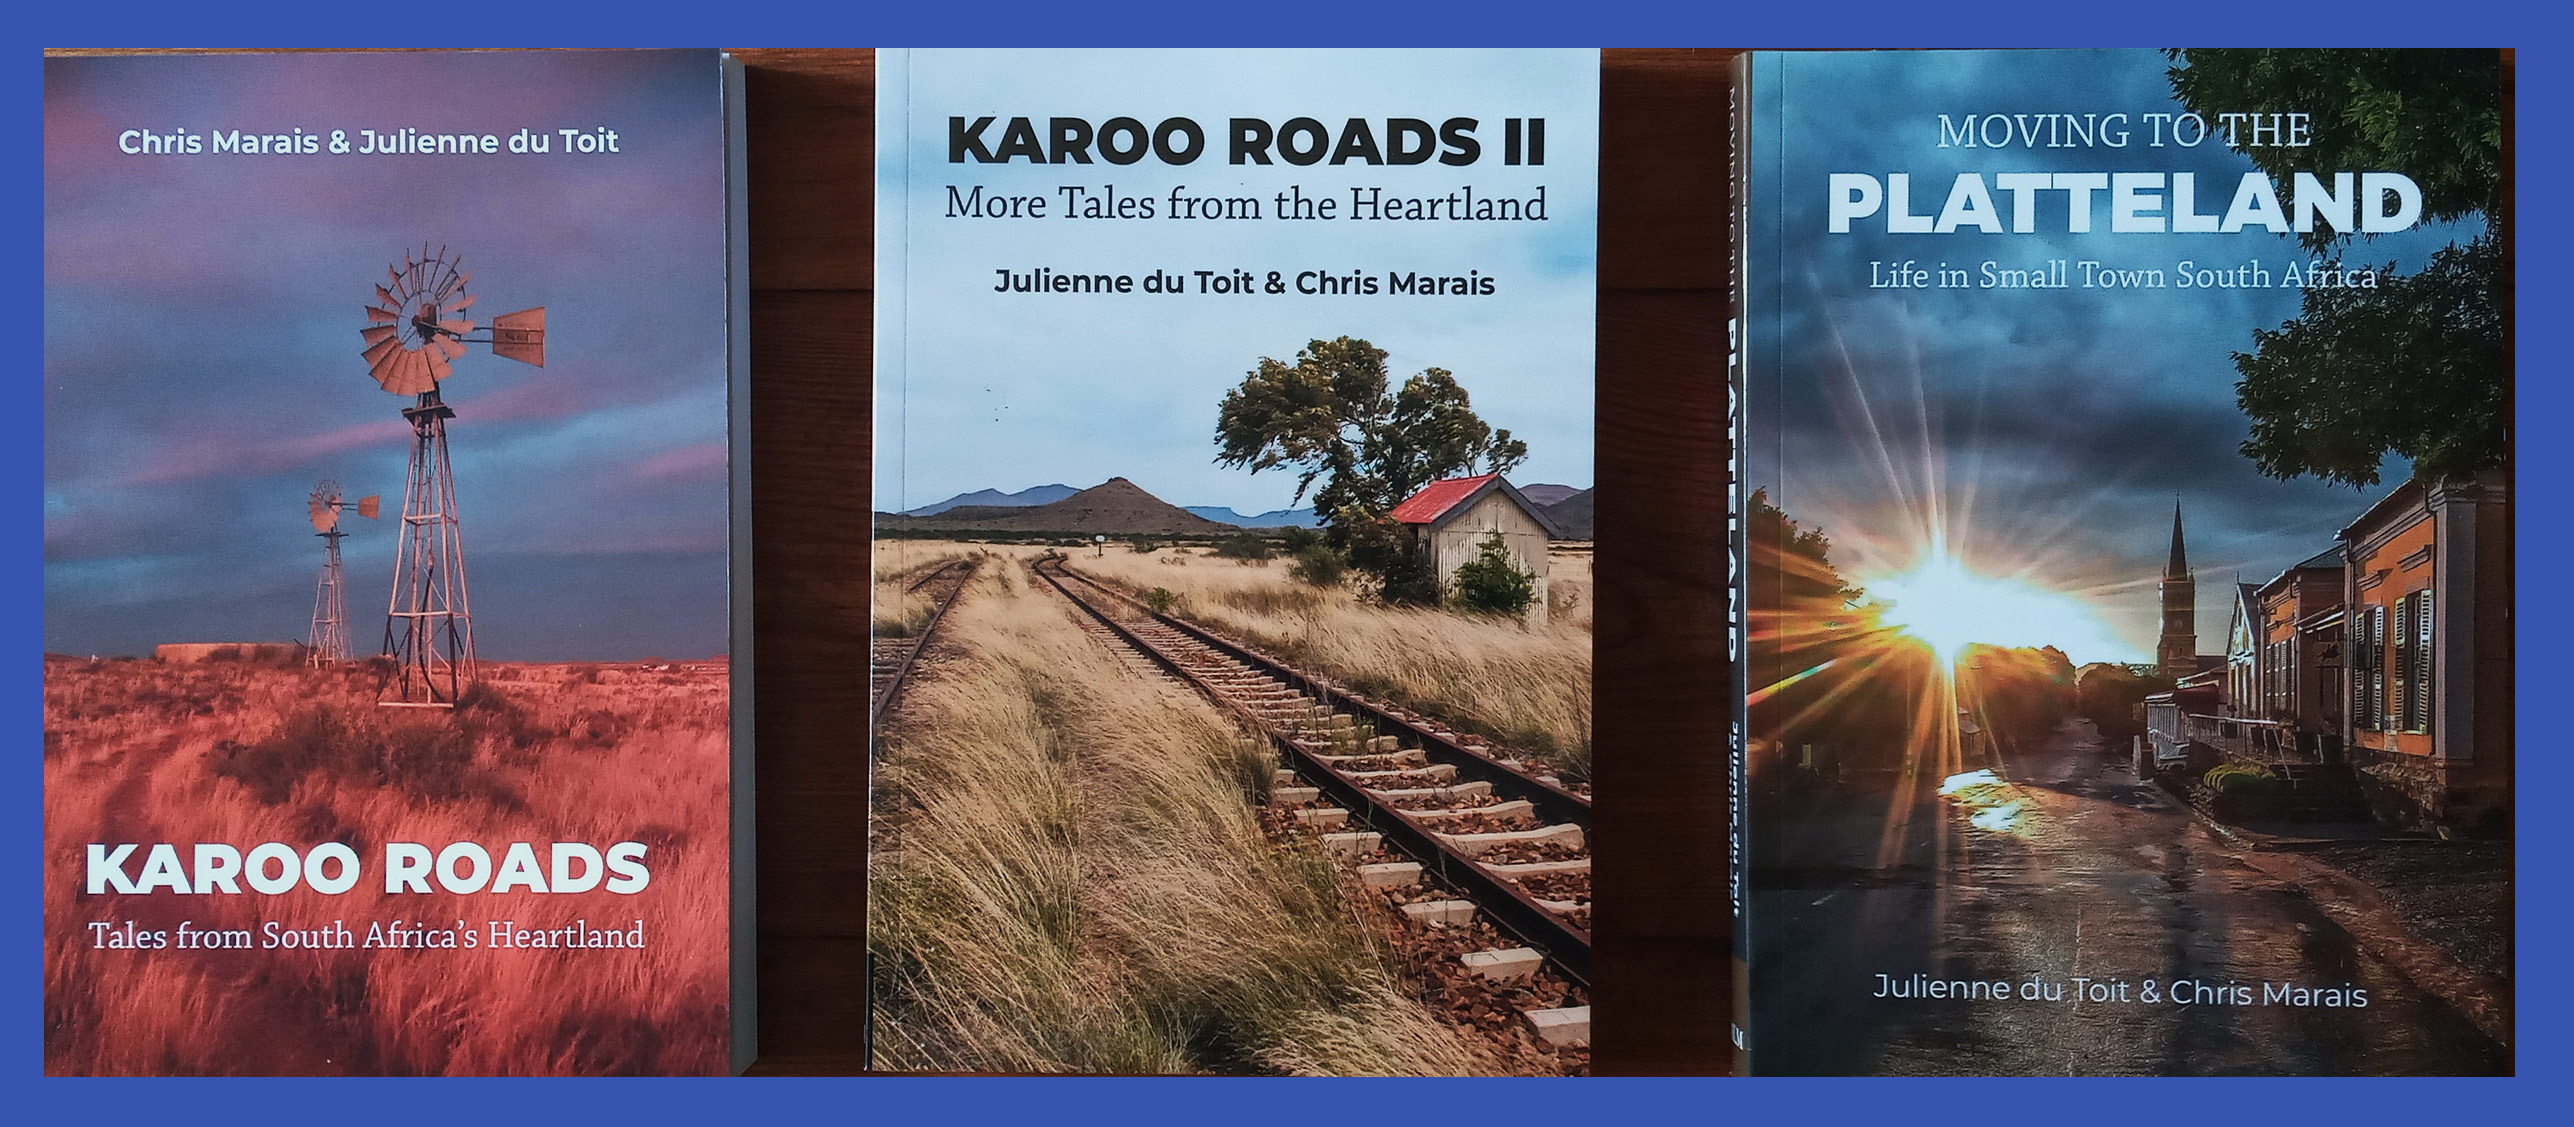 "Karoo Roads", "Karoo Roads II" and "Moving to the Platteland" by By Chris Marais and Julienne du Toit book covers.